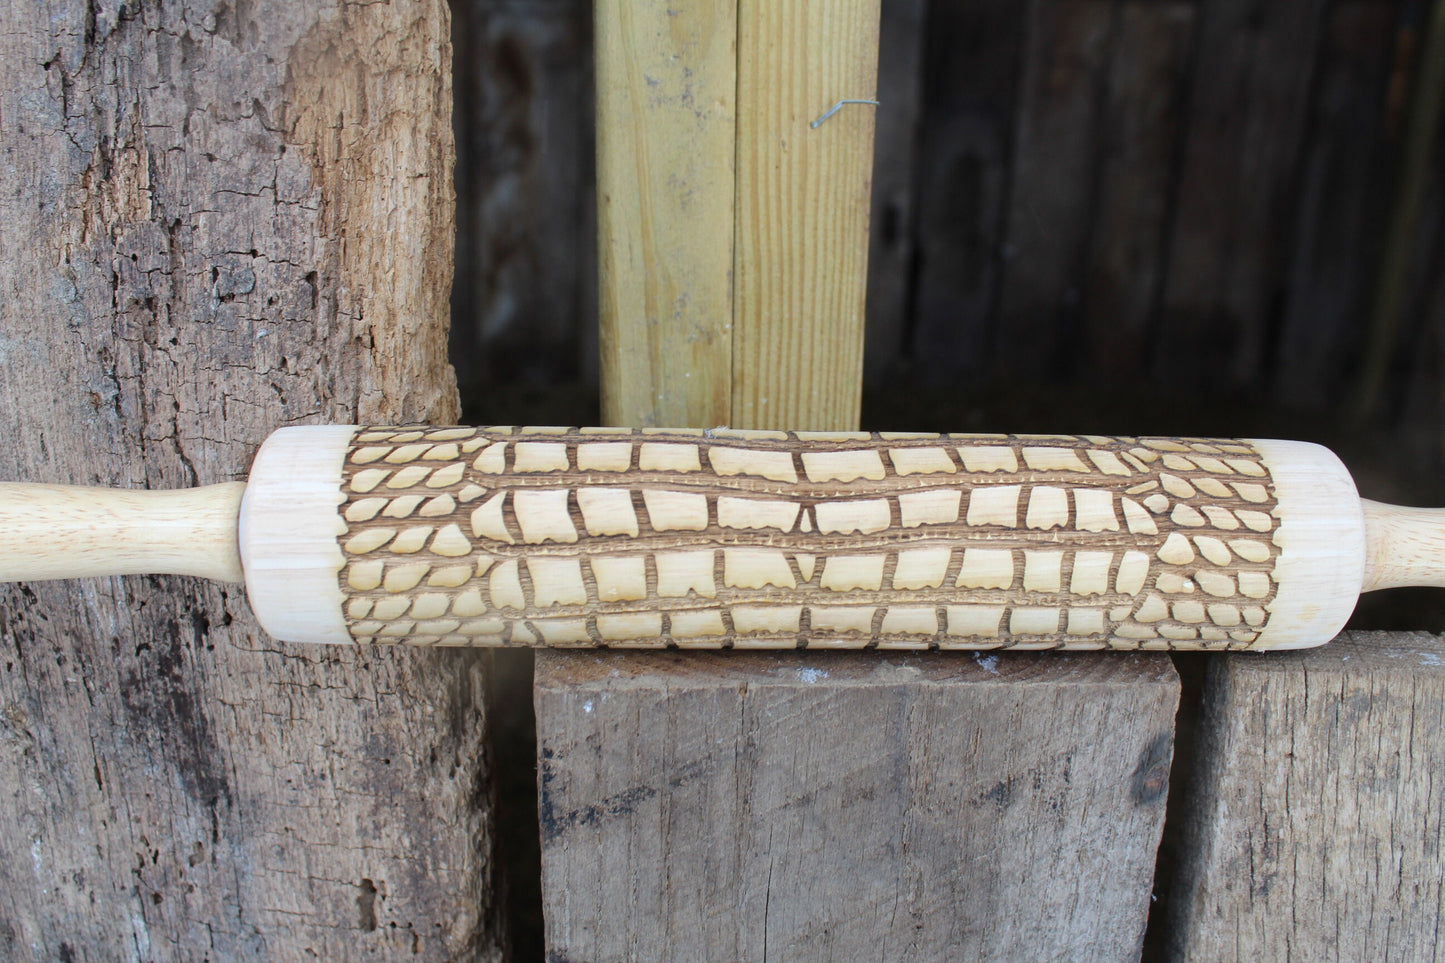 Scale Pattern Alligator Crocodile Reptile Scales 10 Inch Rolling Pin Pie Crust Gift Embossed Pottery Texture Roller Cookie Stamp